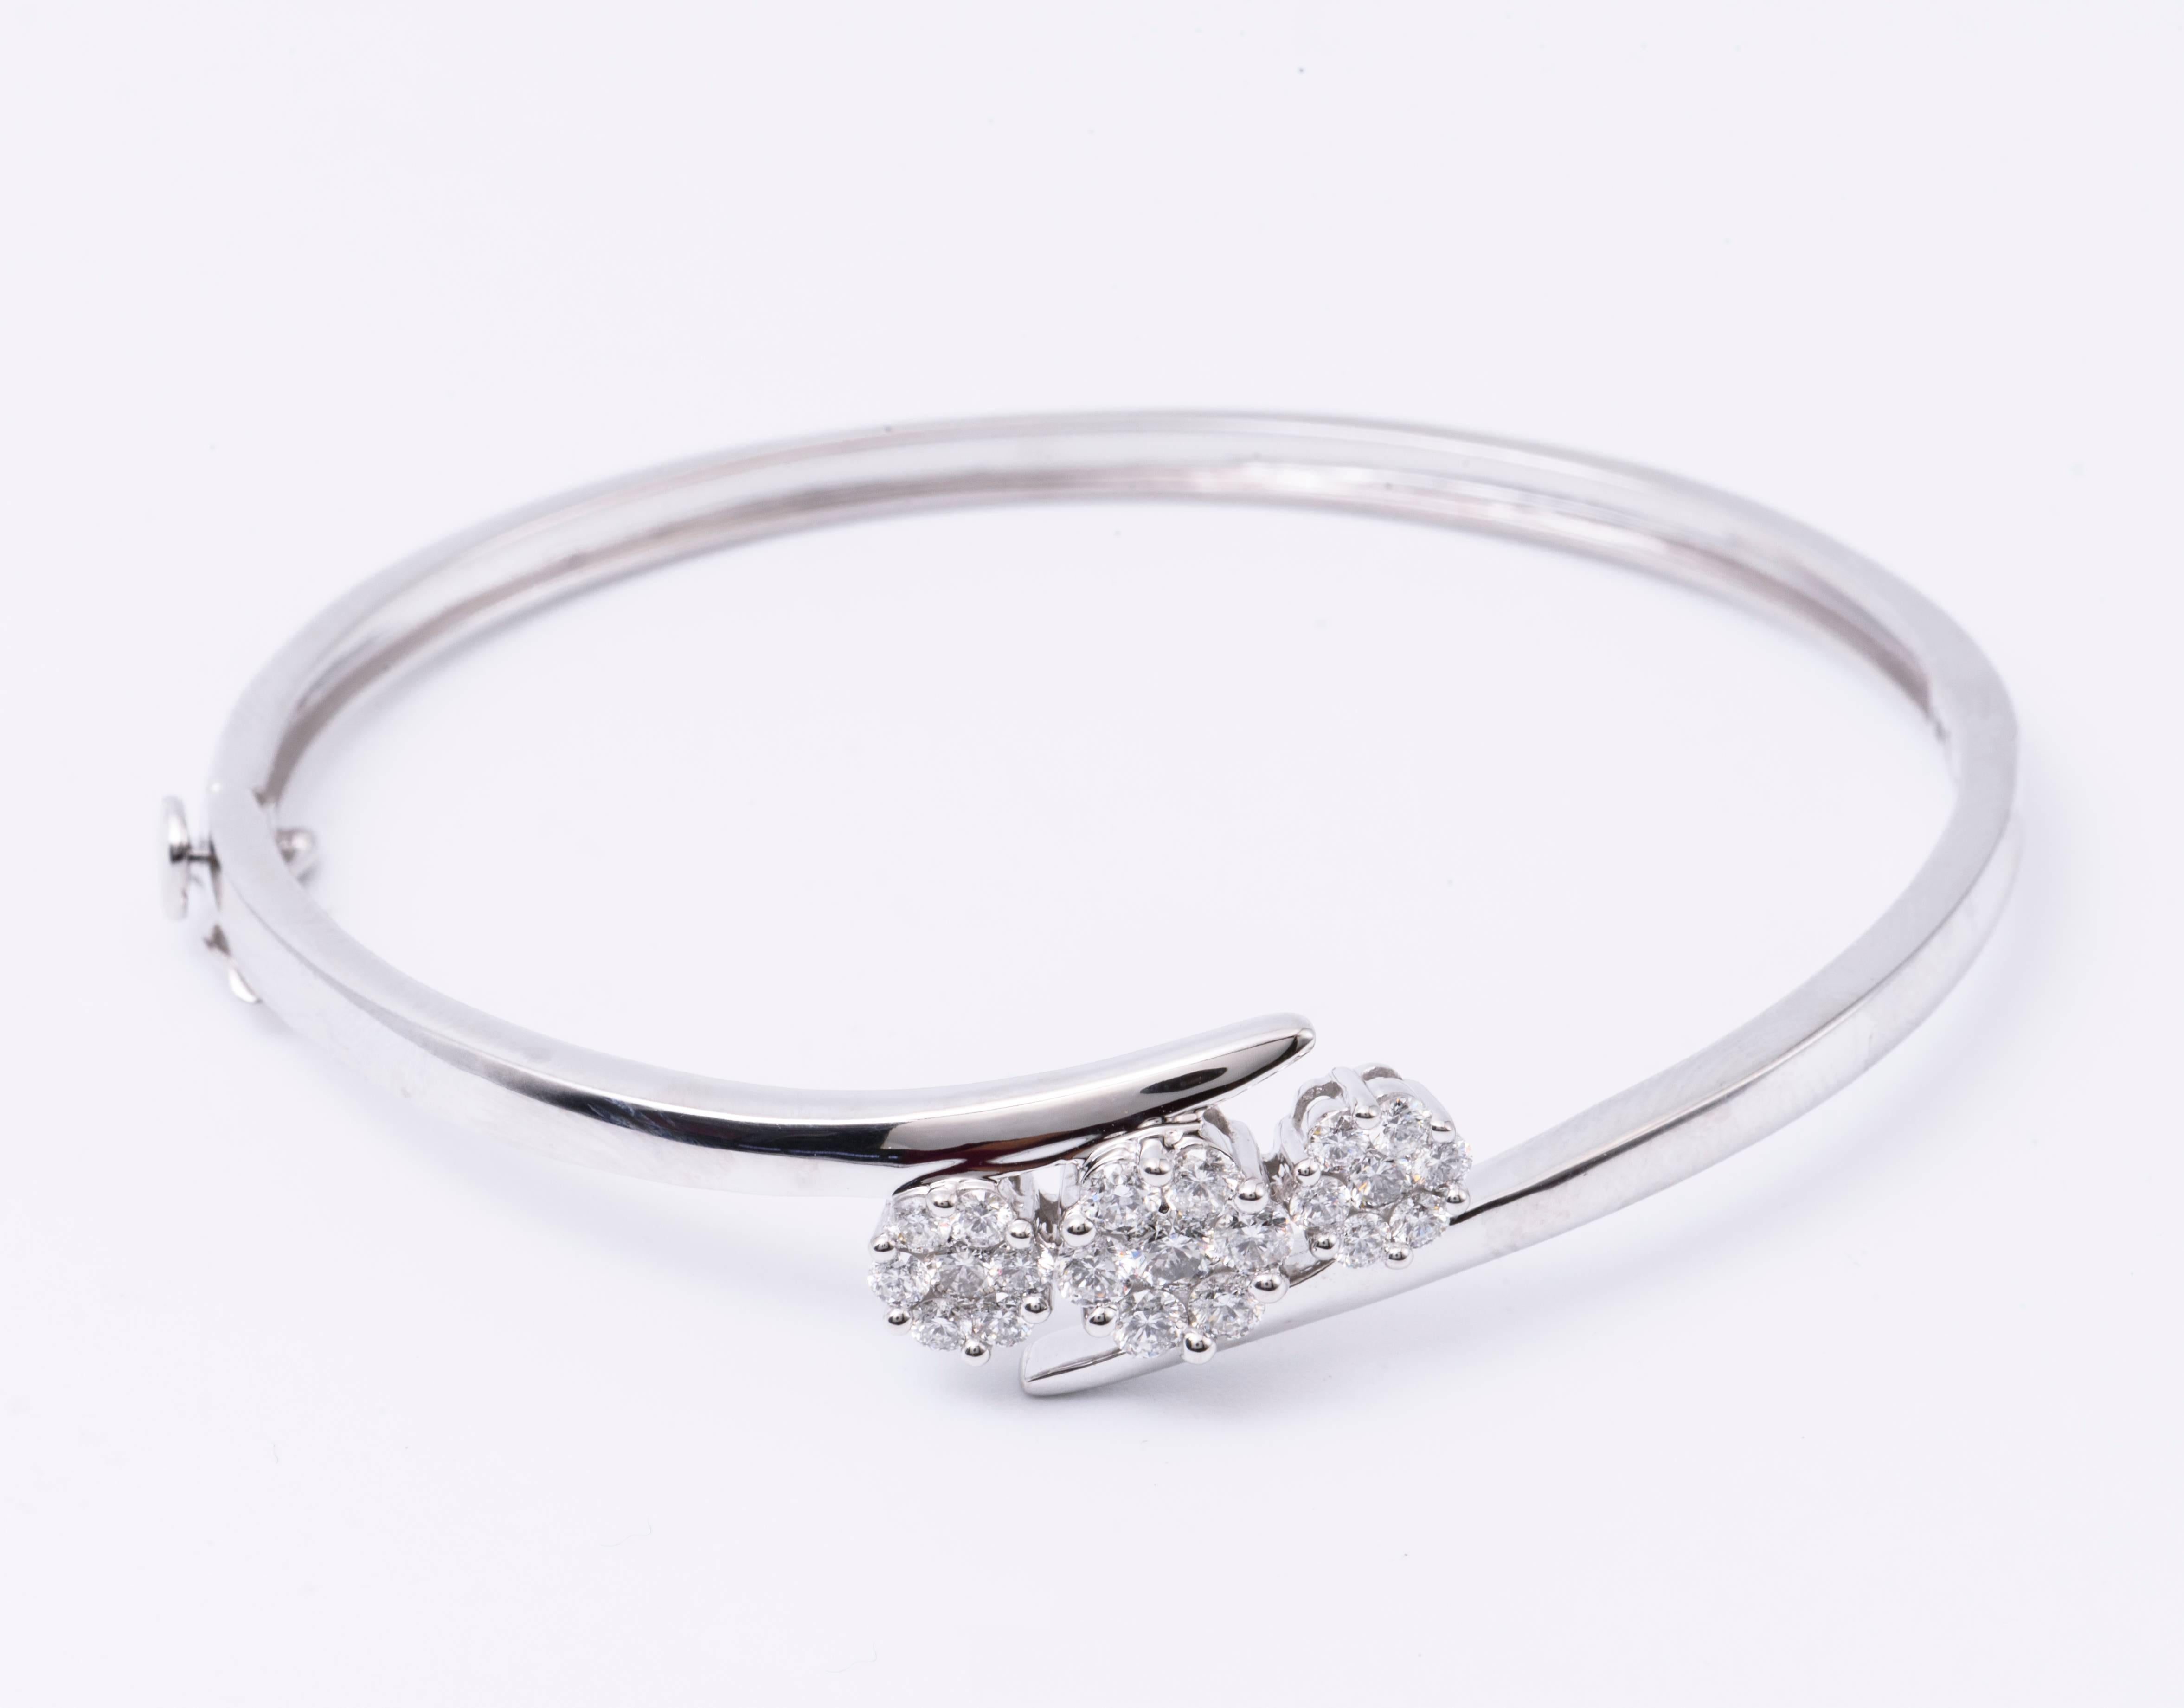 14K White gold bangle featuring three diamond clusters weighing 1.04 carats.
Color G-H
Clarity SI